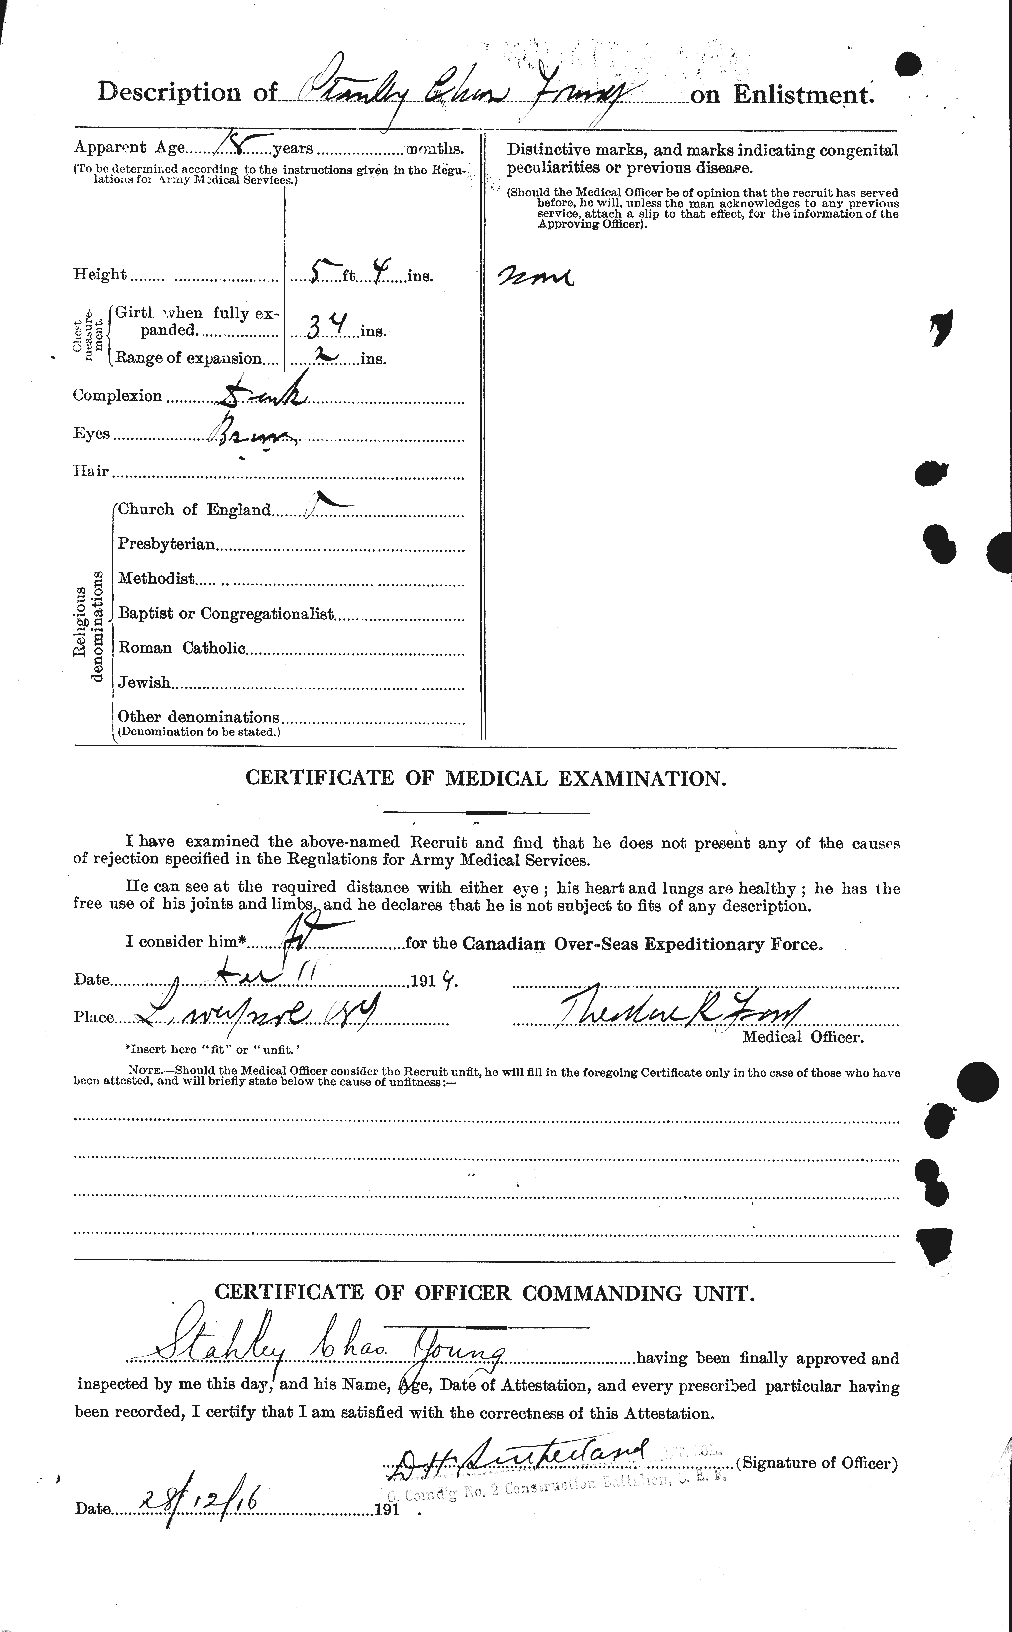 Personnel Records of the First World War - CEF 692303b